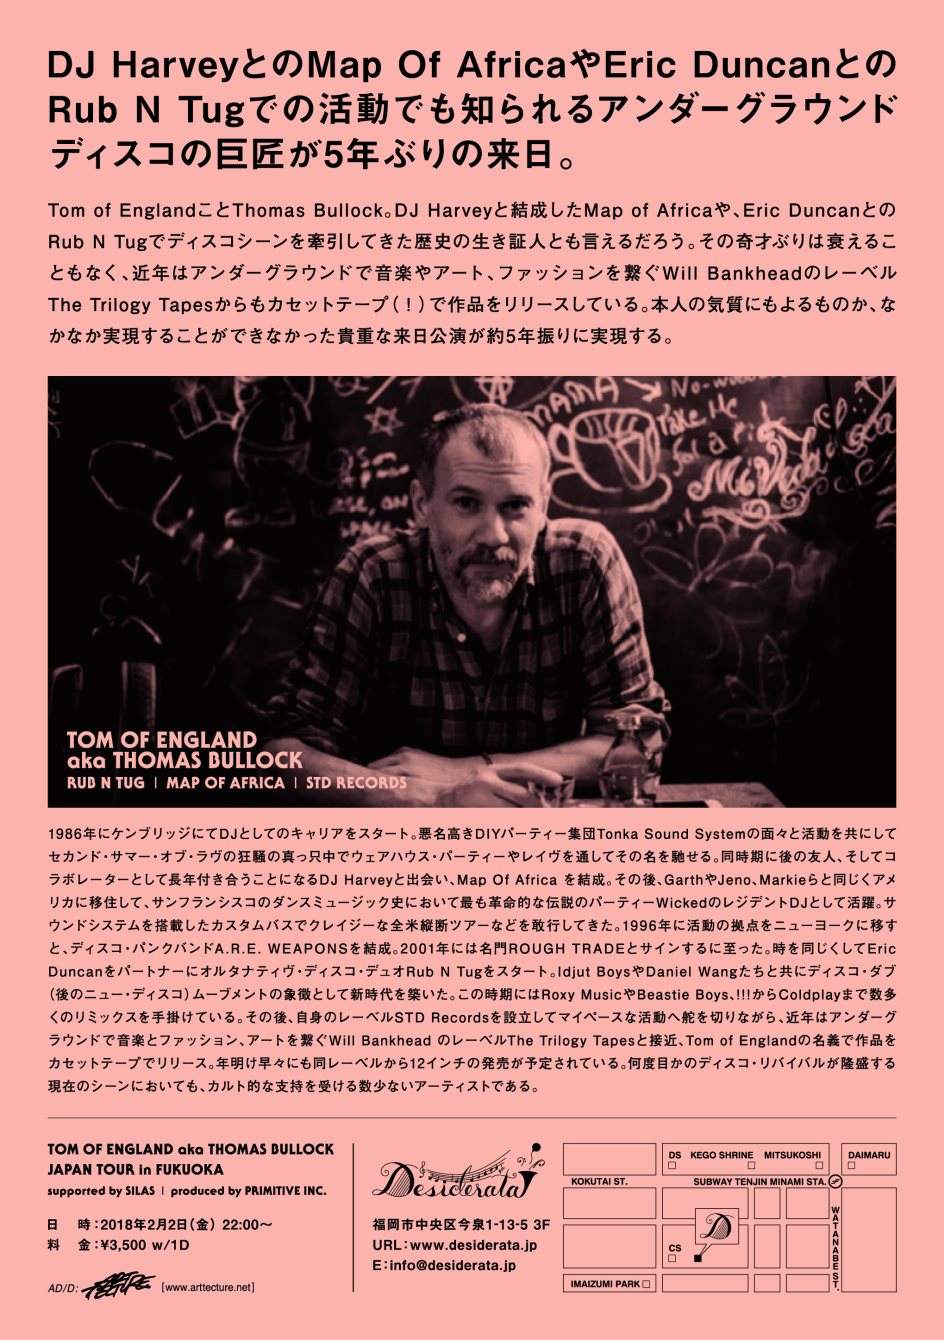 Tom of England aka Thomas Bullock Japan Tour Supported by Silas Produced by Primitive INC - フライヤー裏